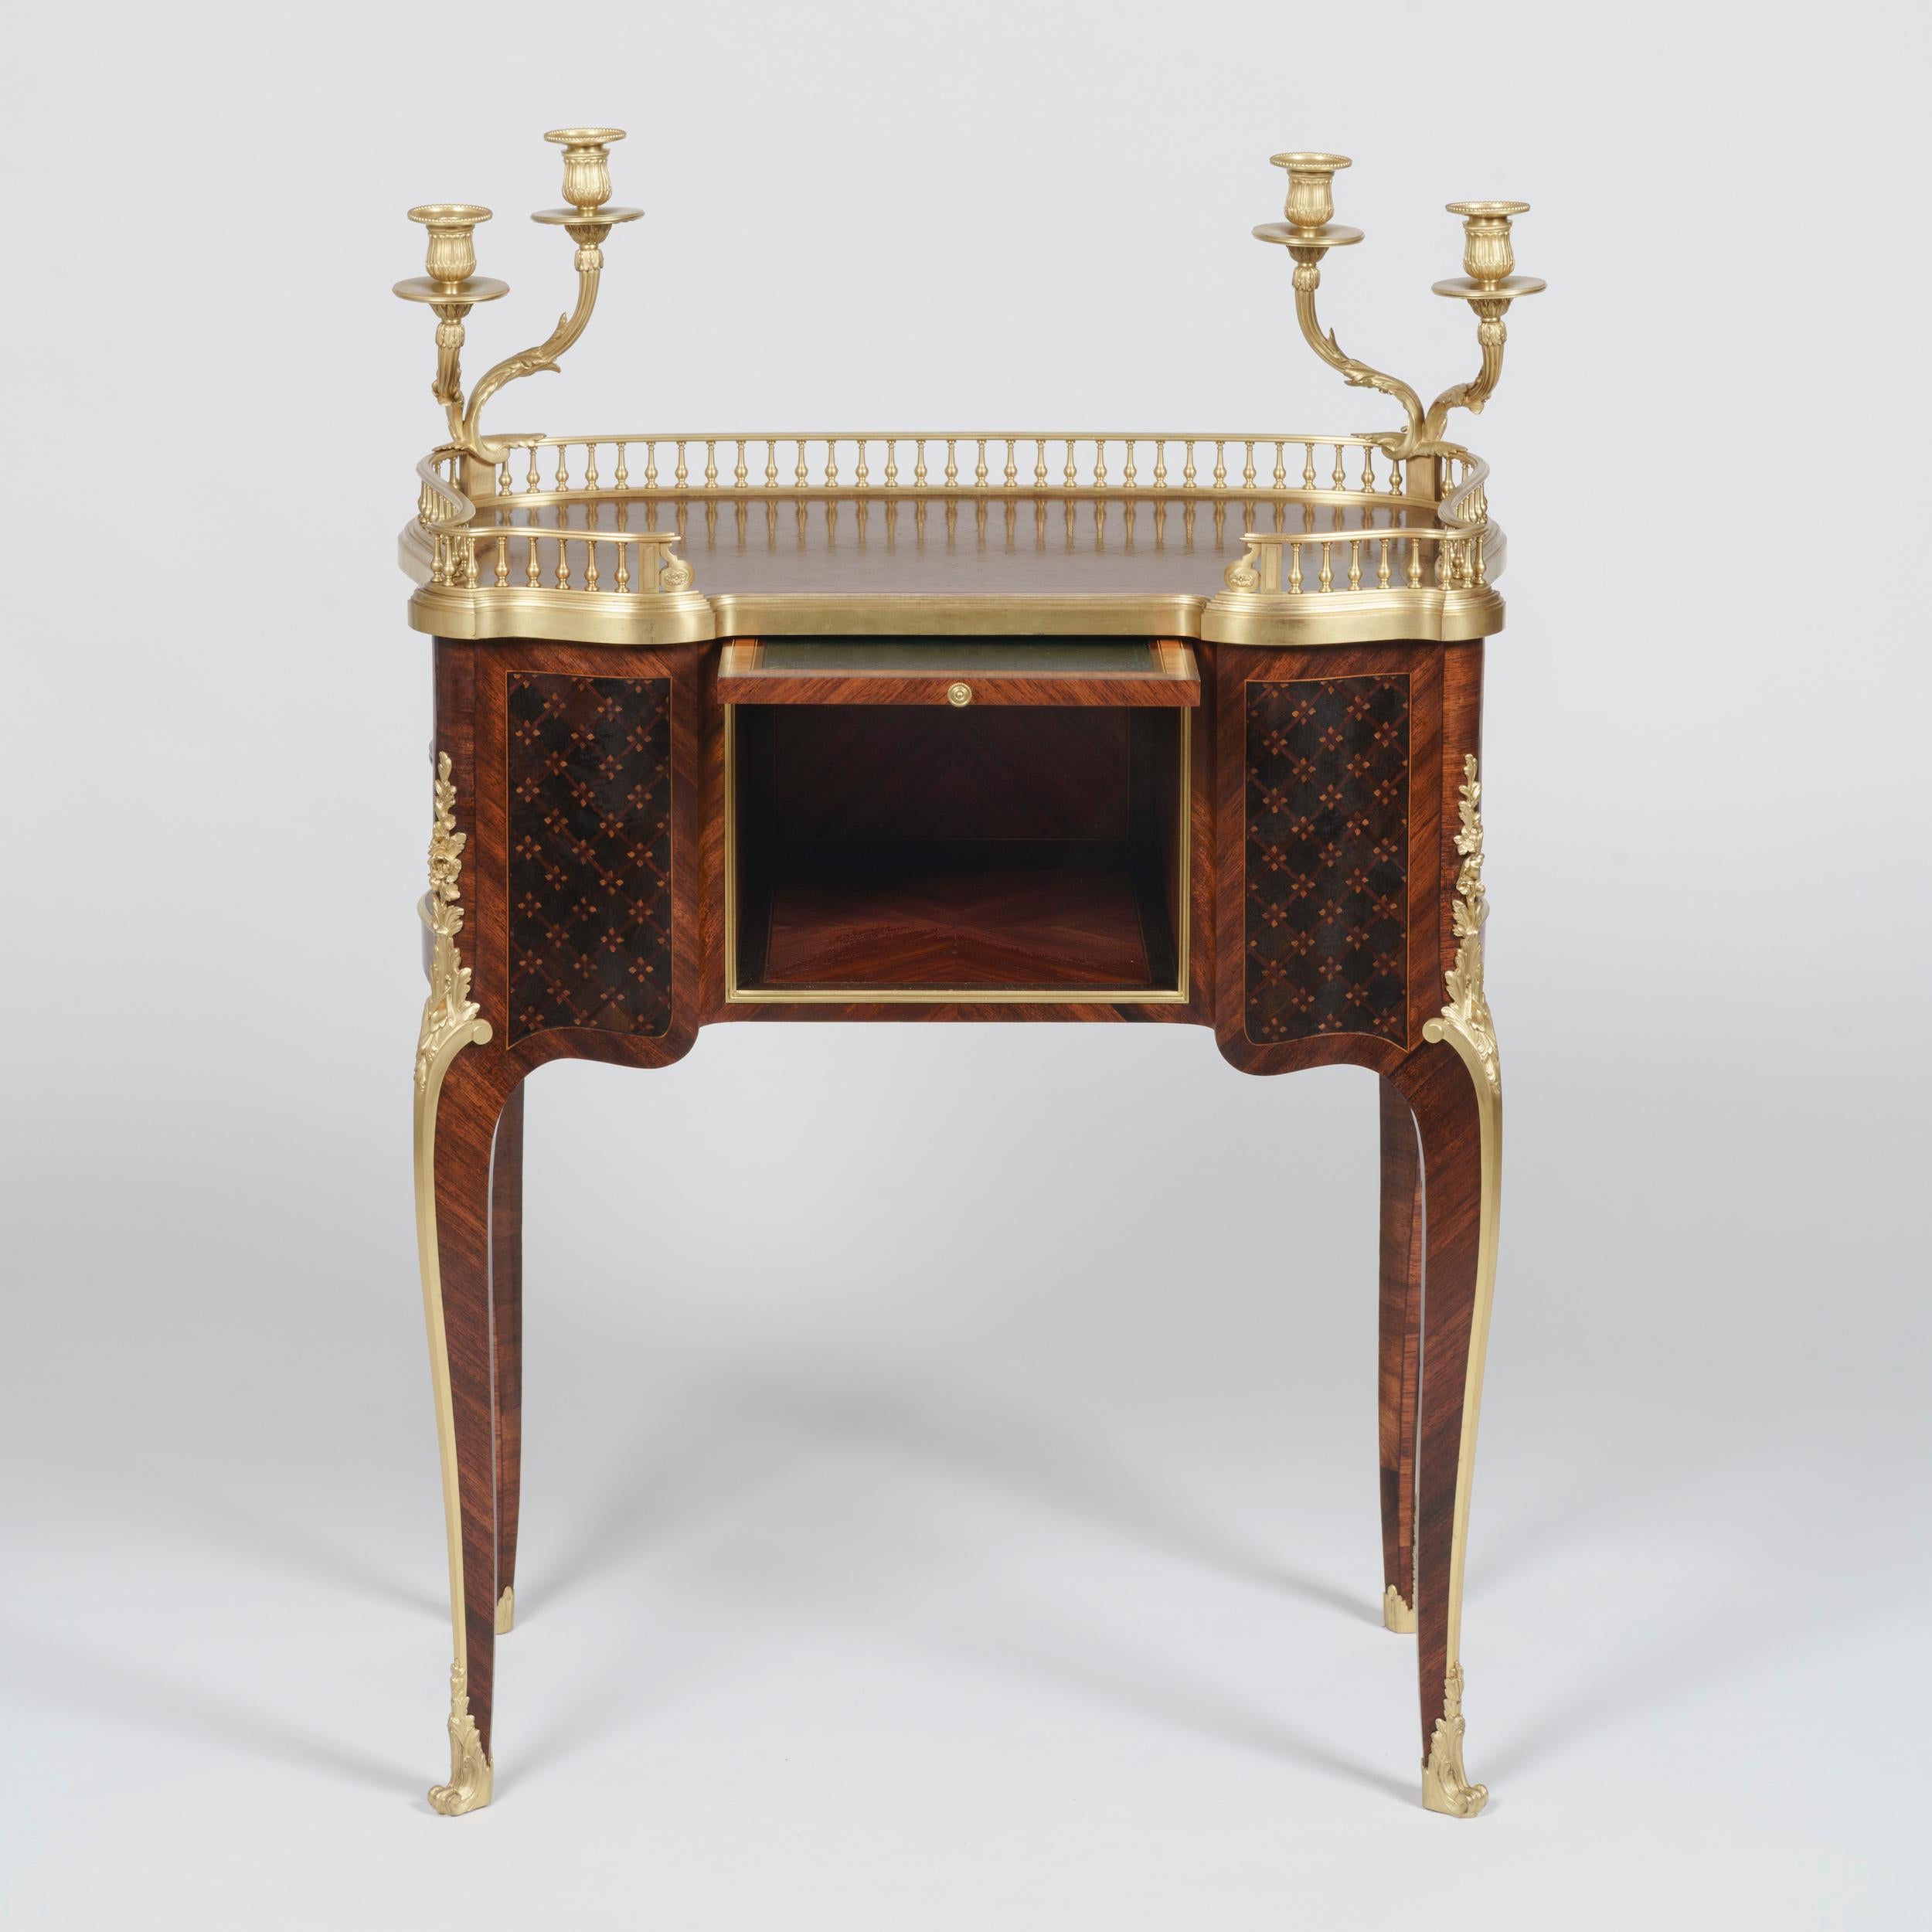 An Elegant Table à Écrire
By Paul Sormani

Constructed from bois satiné and amaranth, with geometric cubed parquetry inlay, the writing table on slender cabriole legs with ormolu floral espagnolettes and scrolled sabots, the inverted breakfront